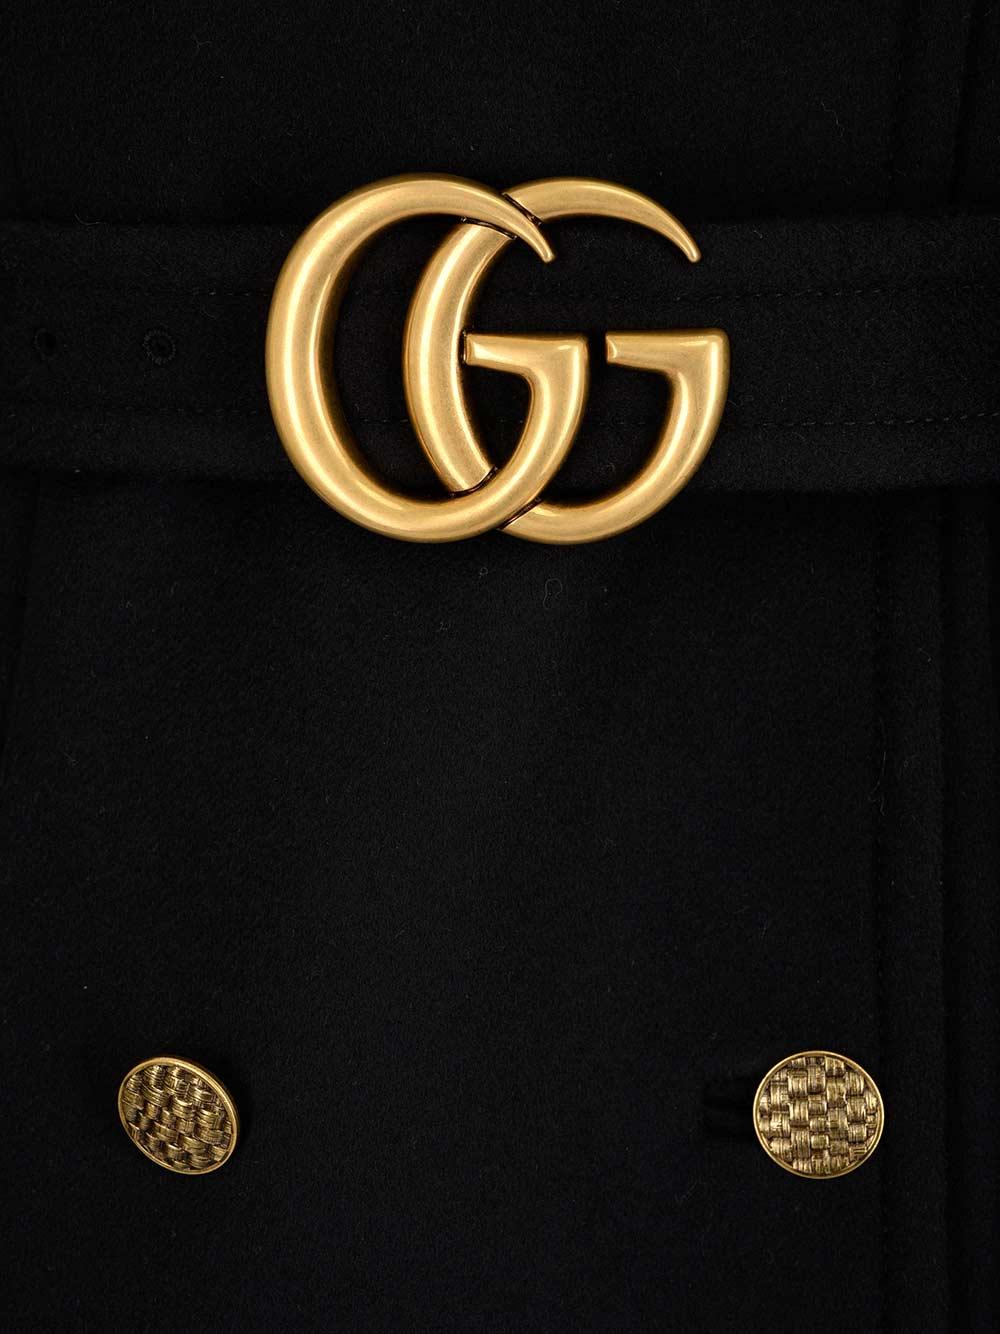 Gucci Double G Belted Coat in Black | Lyst